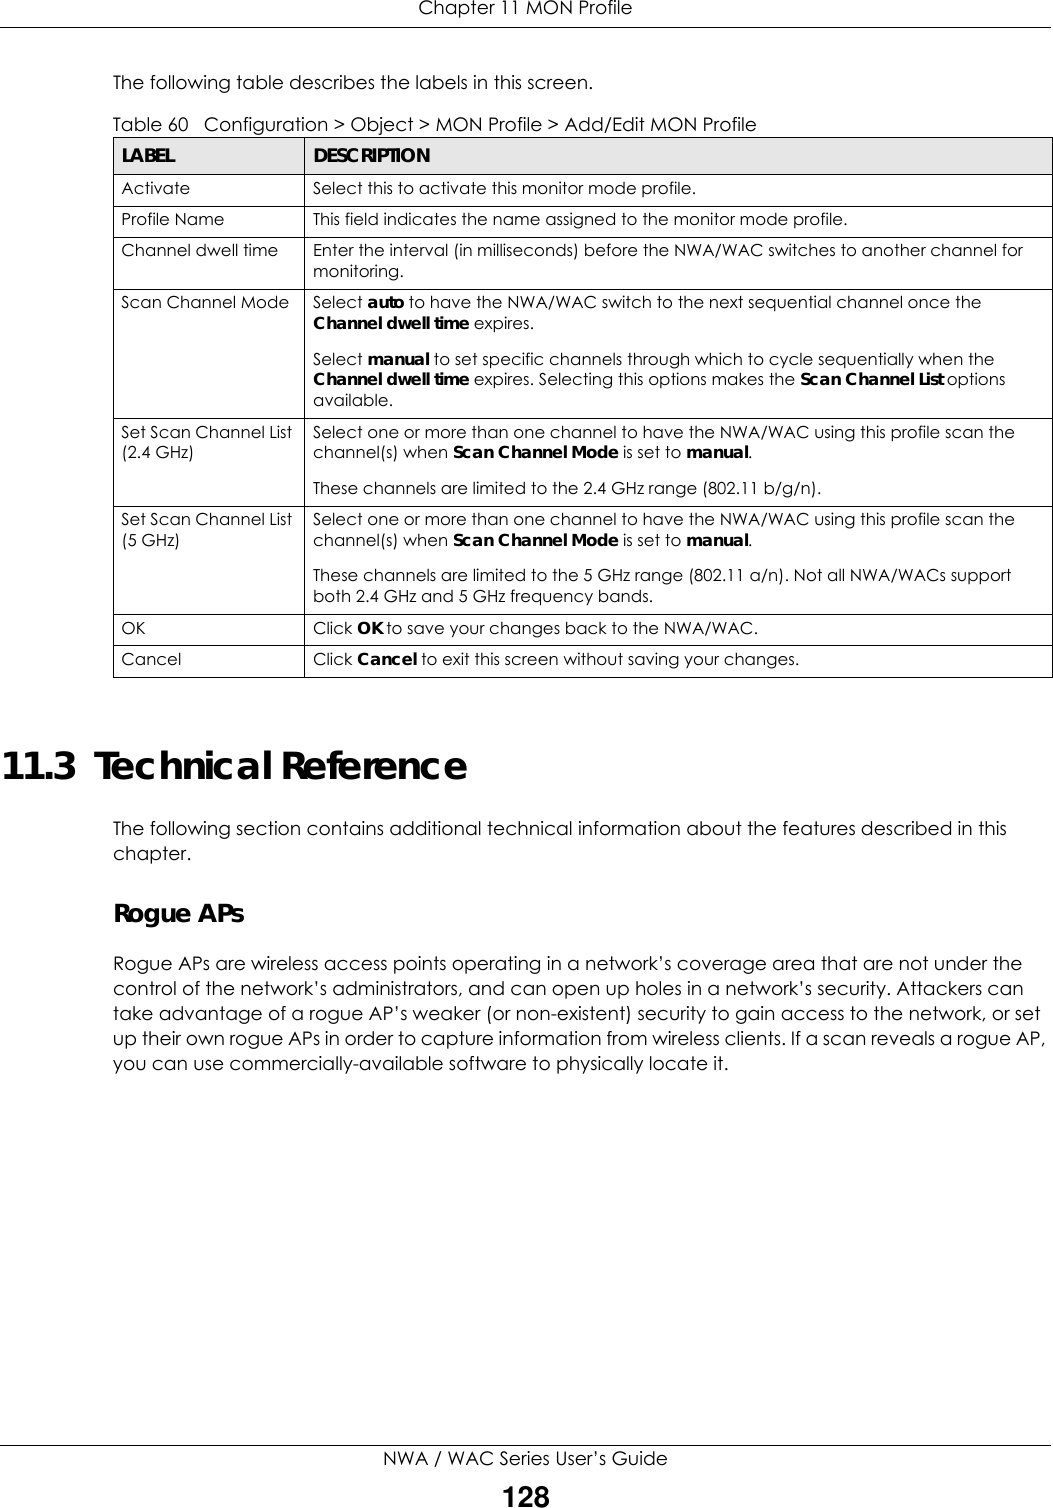 Chapter 11 MON ProfileNWA / WAC Series User’s Guide128The following table describes the labels in this screen.  11.3  Technical ReferenceThe following section contains additional technical information about the features described in this chapter.Rogue APsRogue APs are wireless access points operating in a network’s coverage area that are not under the control of the network’s administrators, and can open up holes in a network’s security. Attackers can take advantage of a rogue AP’s weaker (or non-existent) security to gain access to the network, or set up their own rogue APs in order to capture information from wireless clients. If a scan reveals a rogue AP, you can use commercially-available software to physically locate it.Table 60   Configuration &gt; Object &gt; MON Profile &gt; Add/Edit MON ProfileLABEL DESCRIPTIONActivate Select this to activate this monitor mode profile.Profile Name This field indicates the name assigned to the monitor mode profile.Channel dwell time Enter the interval (in milliseconds) before the NWA/WAC switches to another channel for monitoring.Scan Channel Mode Select auto to have the NWA/WAC switch to the next sequential channel once the Channel dwell time expires.Select manual to set specific channels through which to cycle sequentially when the Channel dwell time expires. Selecting this options makes the Scan Channel List options available.Set Scan Channel List (2.4 GHz)Select one or more than one channel to have the NWA/WAC using this profile scan the channel(s) when Scan Channel Mode is set to manual.These channels are limited to the 2.4 GHz range (802.11 b/g/n).Set Scan Channel List (5 GHz)Select one or more than one channel to have the NWA/WAC using this profile scan the channel(s) when Scan Channel Mode is set to manual.These channels are limited to the 5 GHz range (802.11 a/n). Not all NWA/WACs support both 2.4 GHz and 5 GHz frequency bands.OK Click OK to save your changes back to the NWA/WAC.Cancel Click Cancel to exit this screen without saving your changes.